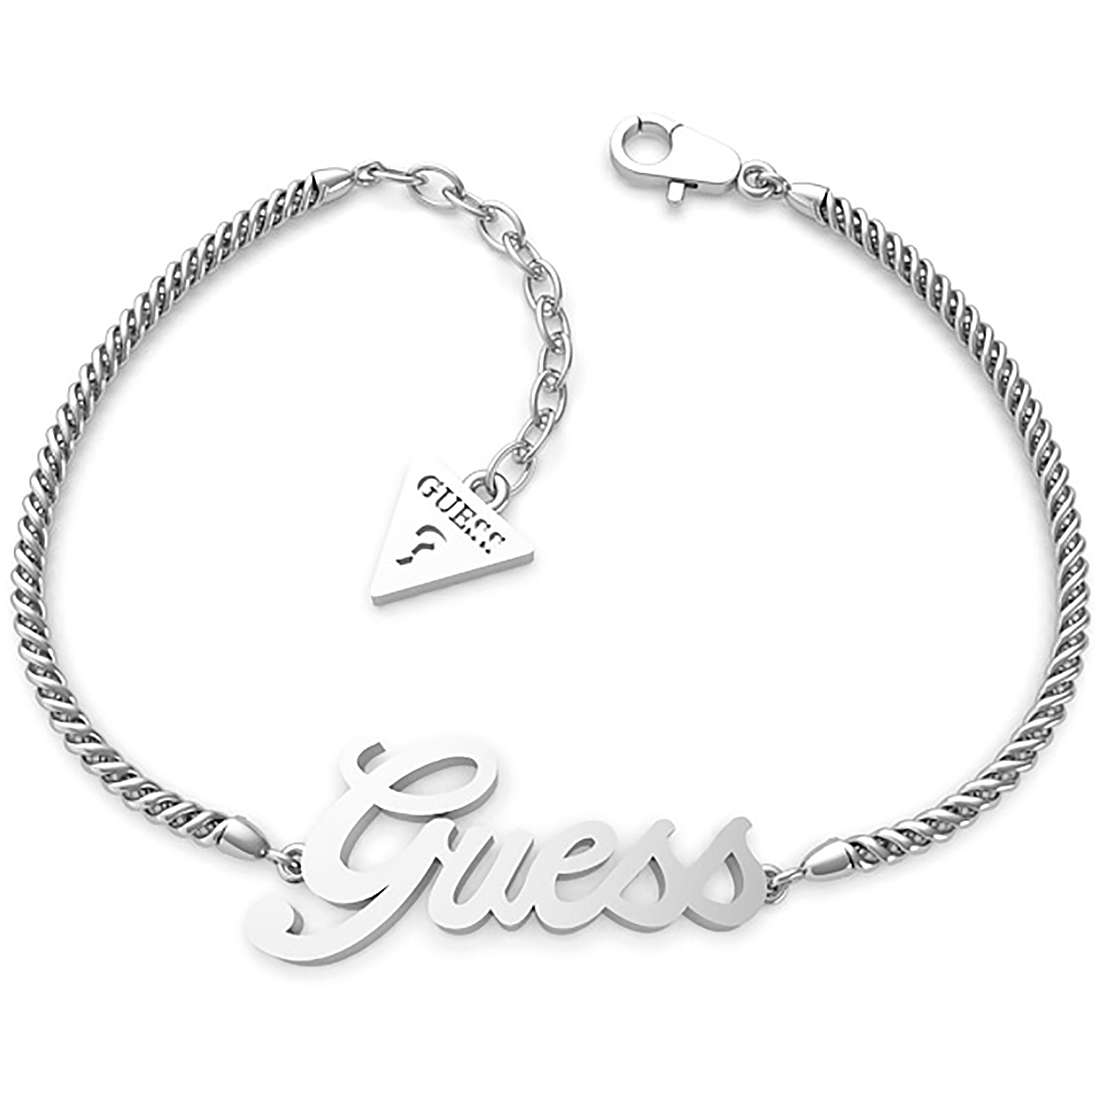 Bracelet Guess UBB83091-S Women Silver Guess Size India | Ubuy